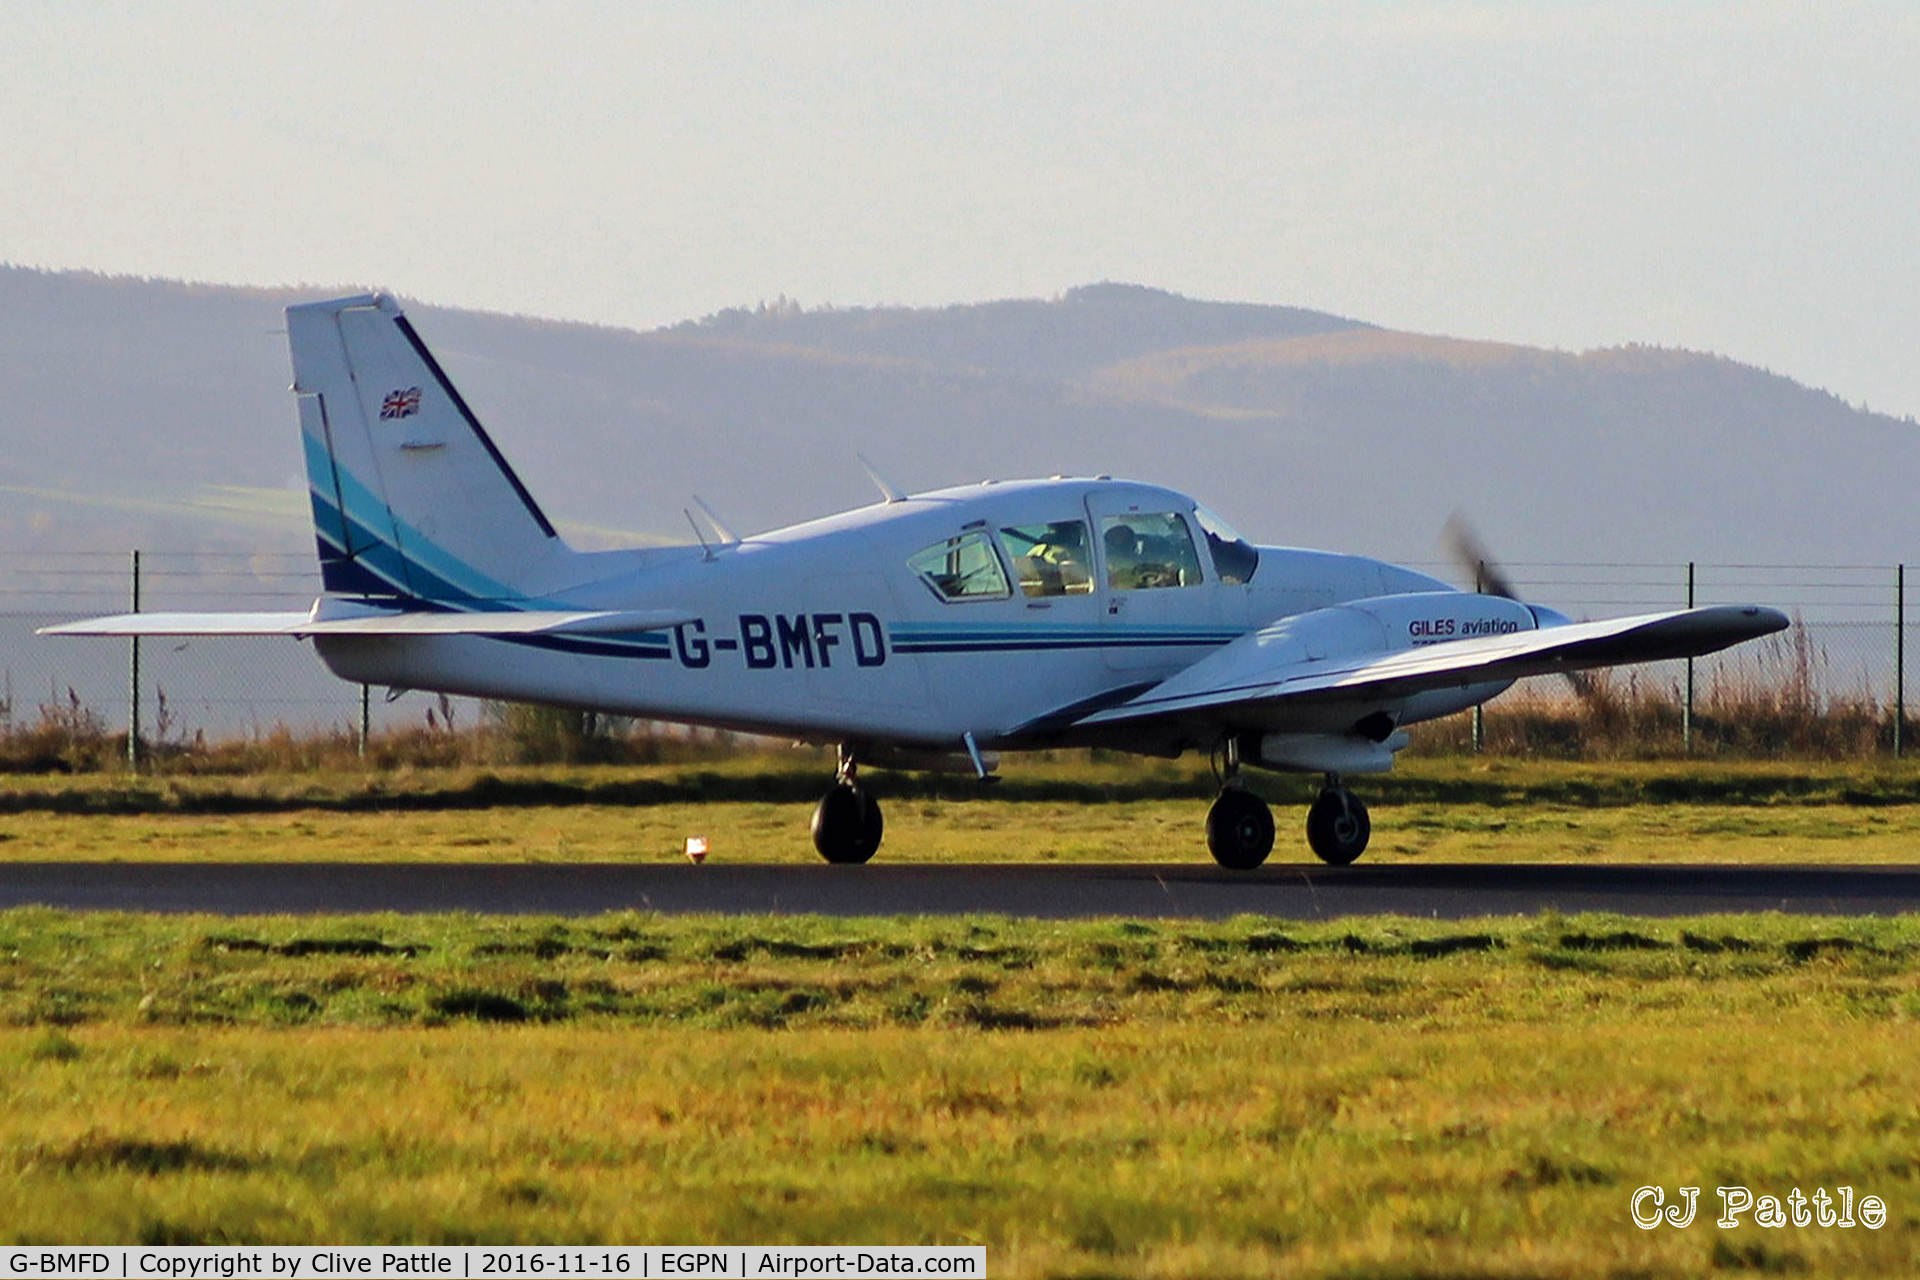 G-BMFD, 1979 Piper PA-23-250 Aztec F C/N 27-7954080, At Dundee